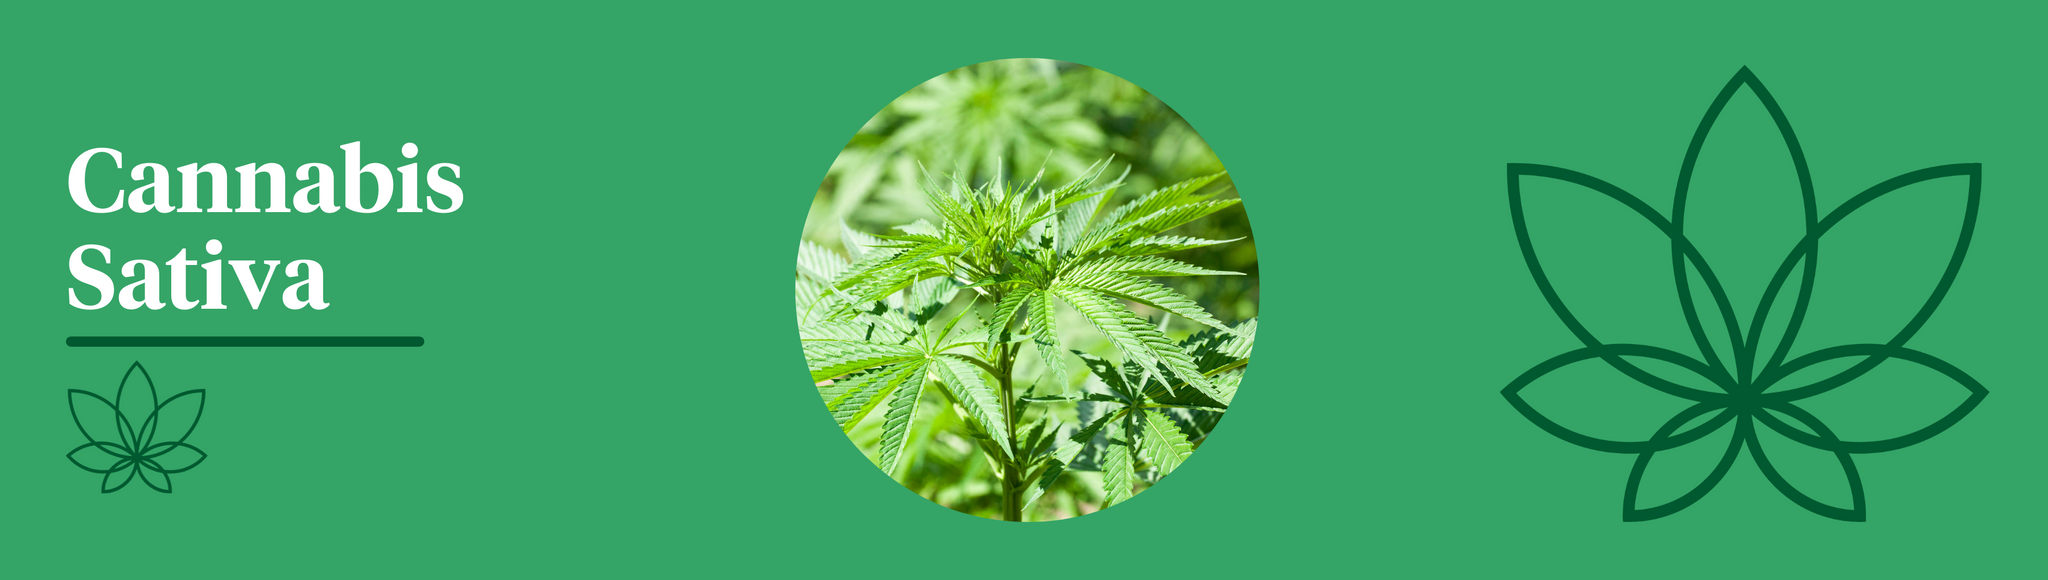 A green background with the Supreme CBD logo to the right of the image with a close up image of the Cannabis Sativa plant in the centre showing the difference between indica and sativa.